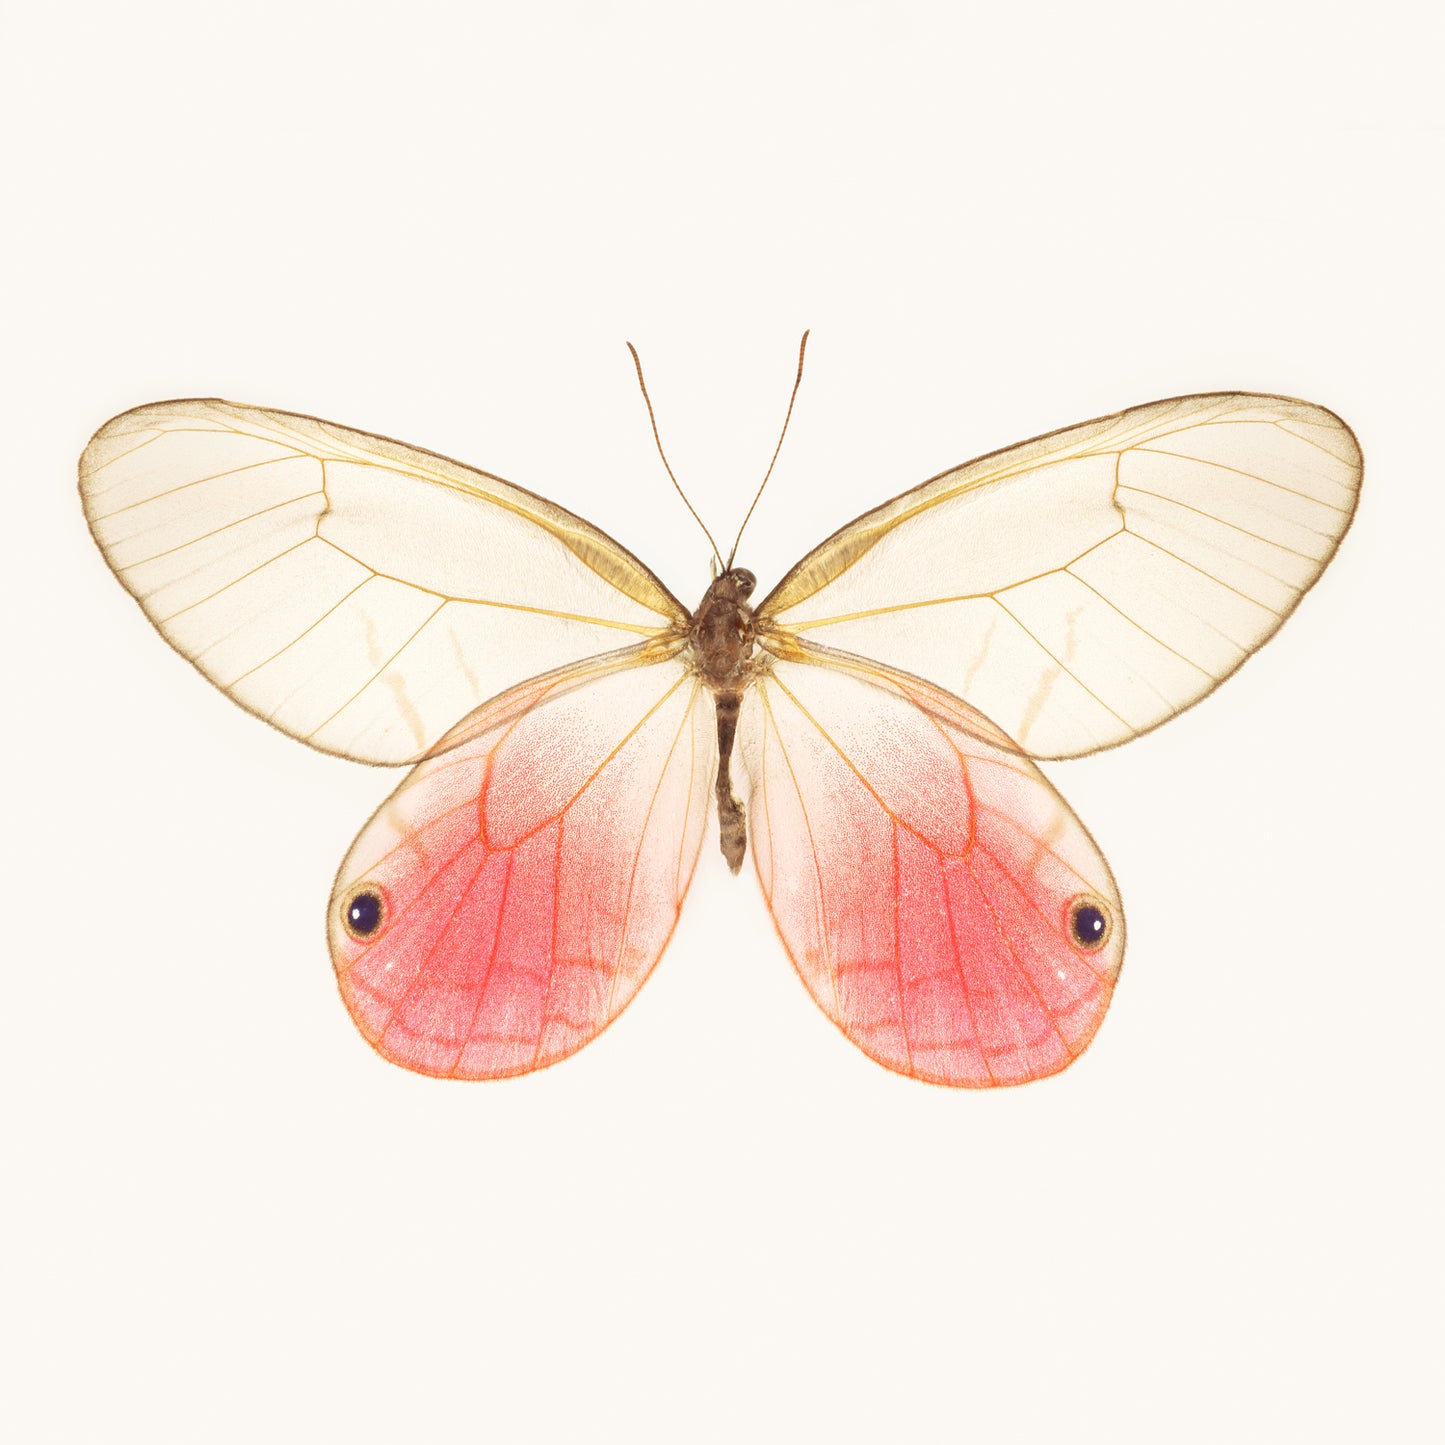 SQ Butterfly No. 1 - Pink Glasswing Butterfly